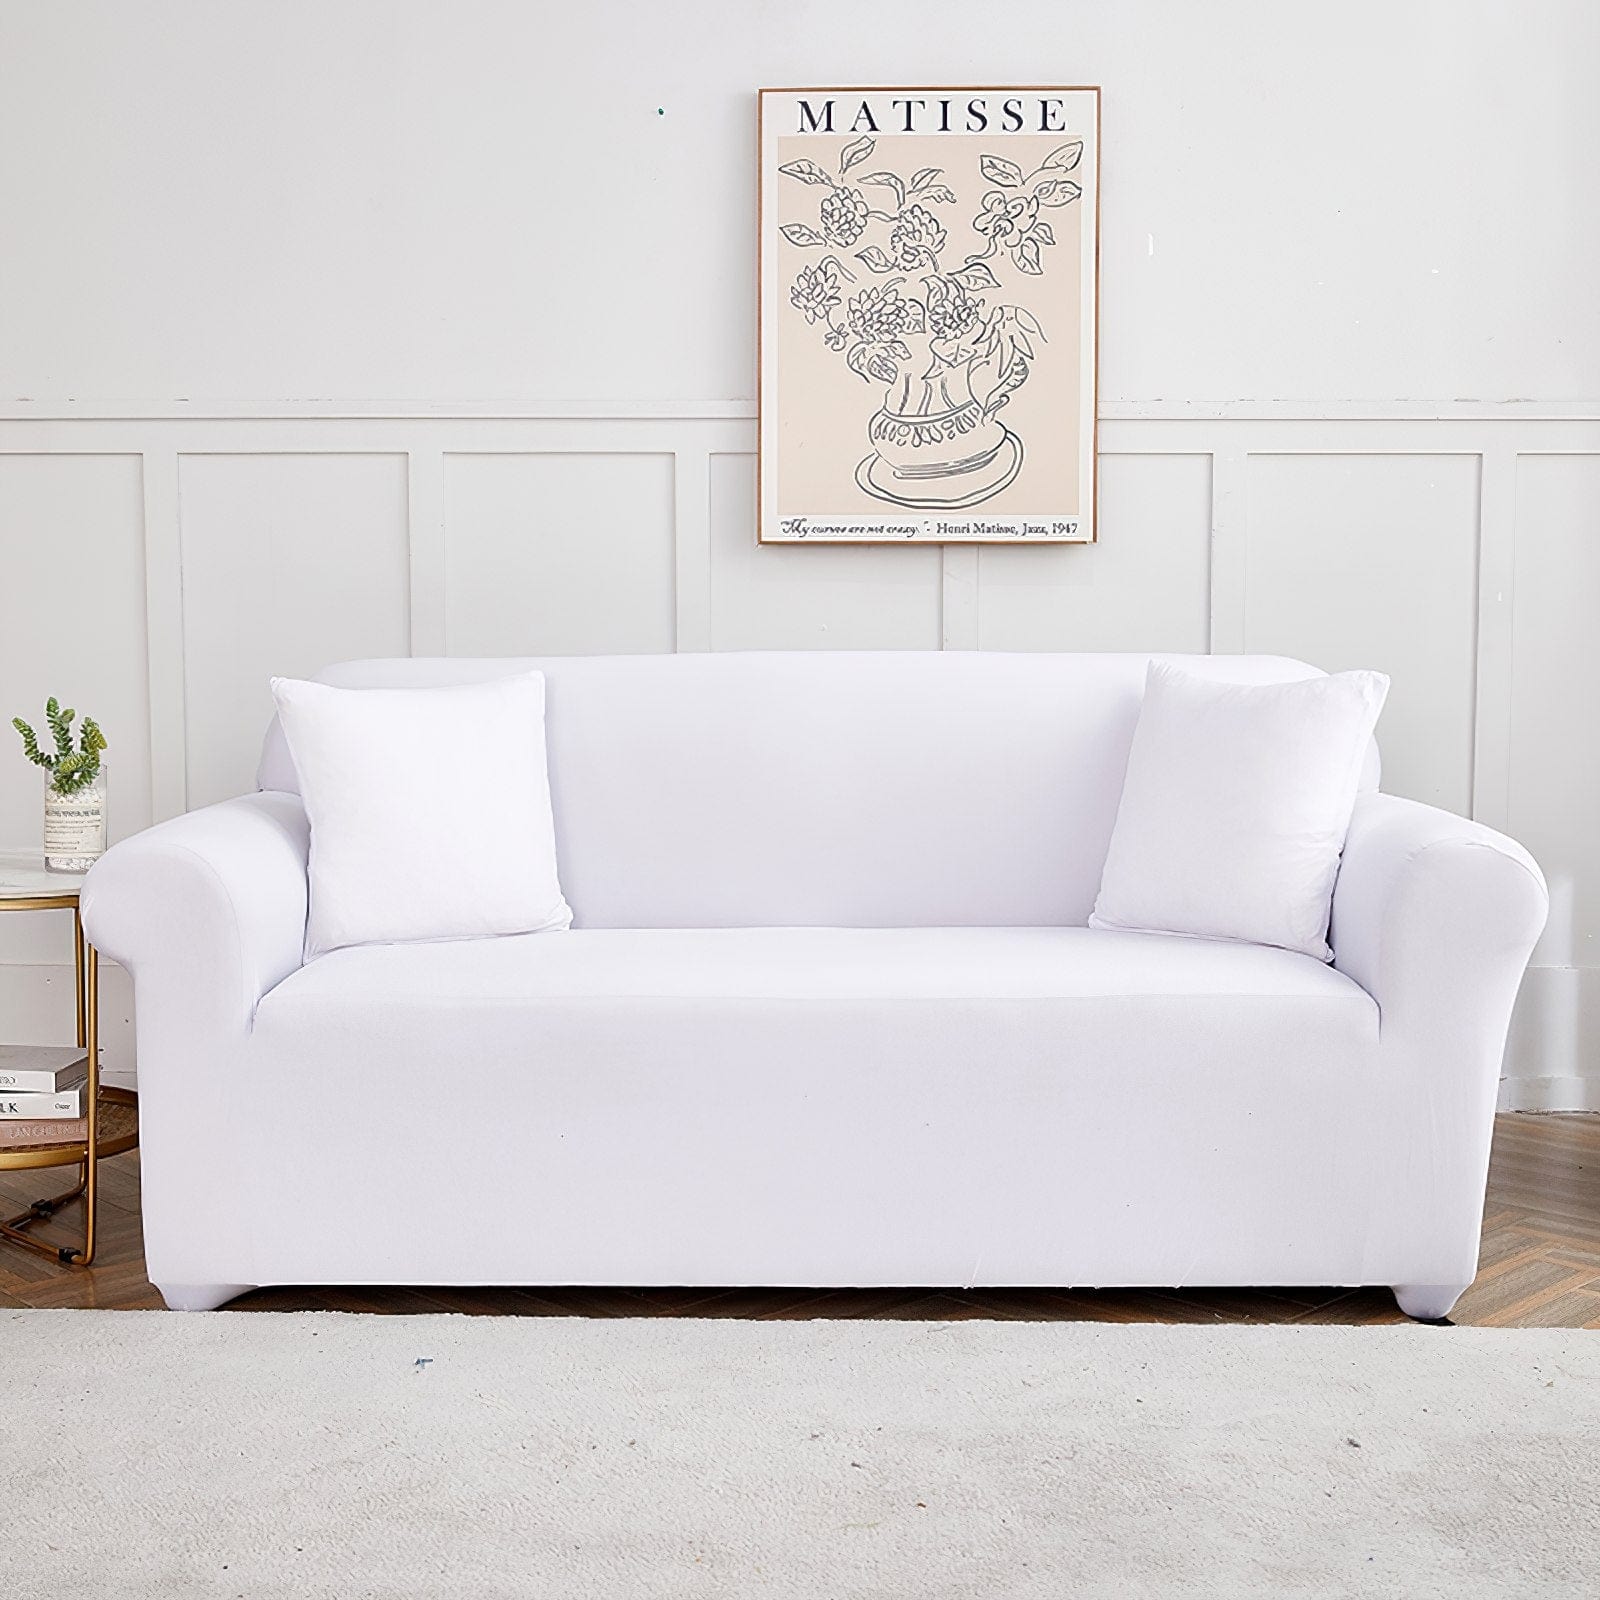 White - Extendable Armchair and Sofa Covers - The Sofa Cover House